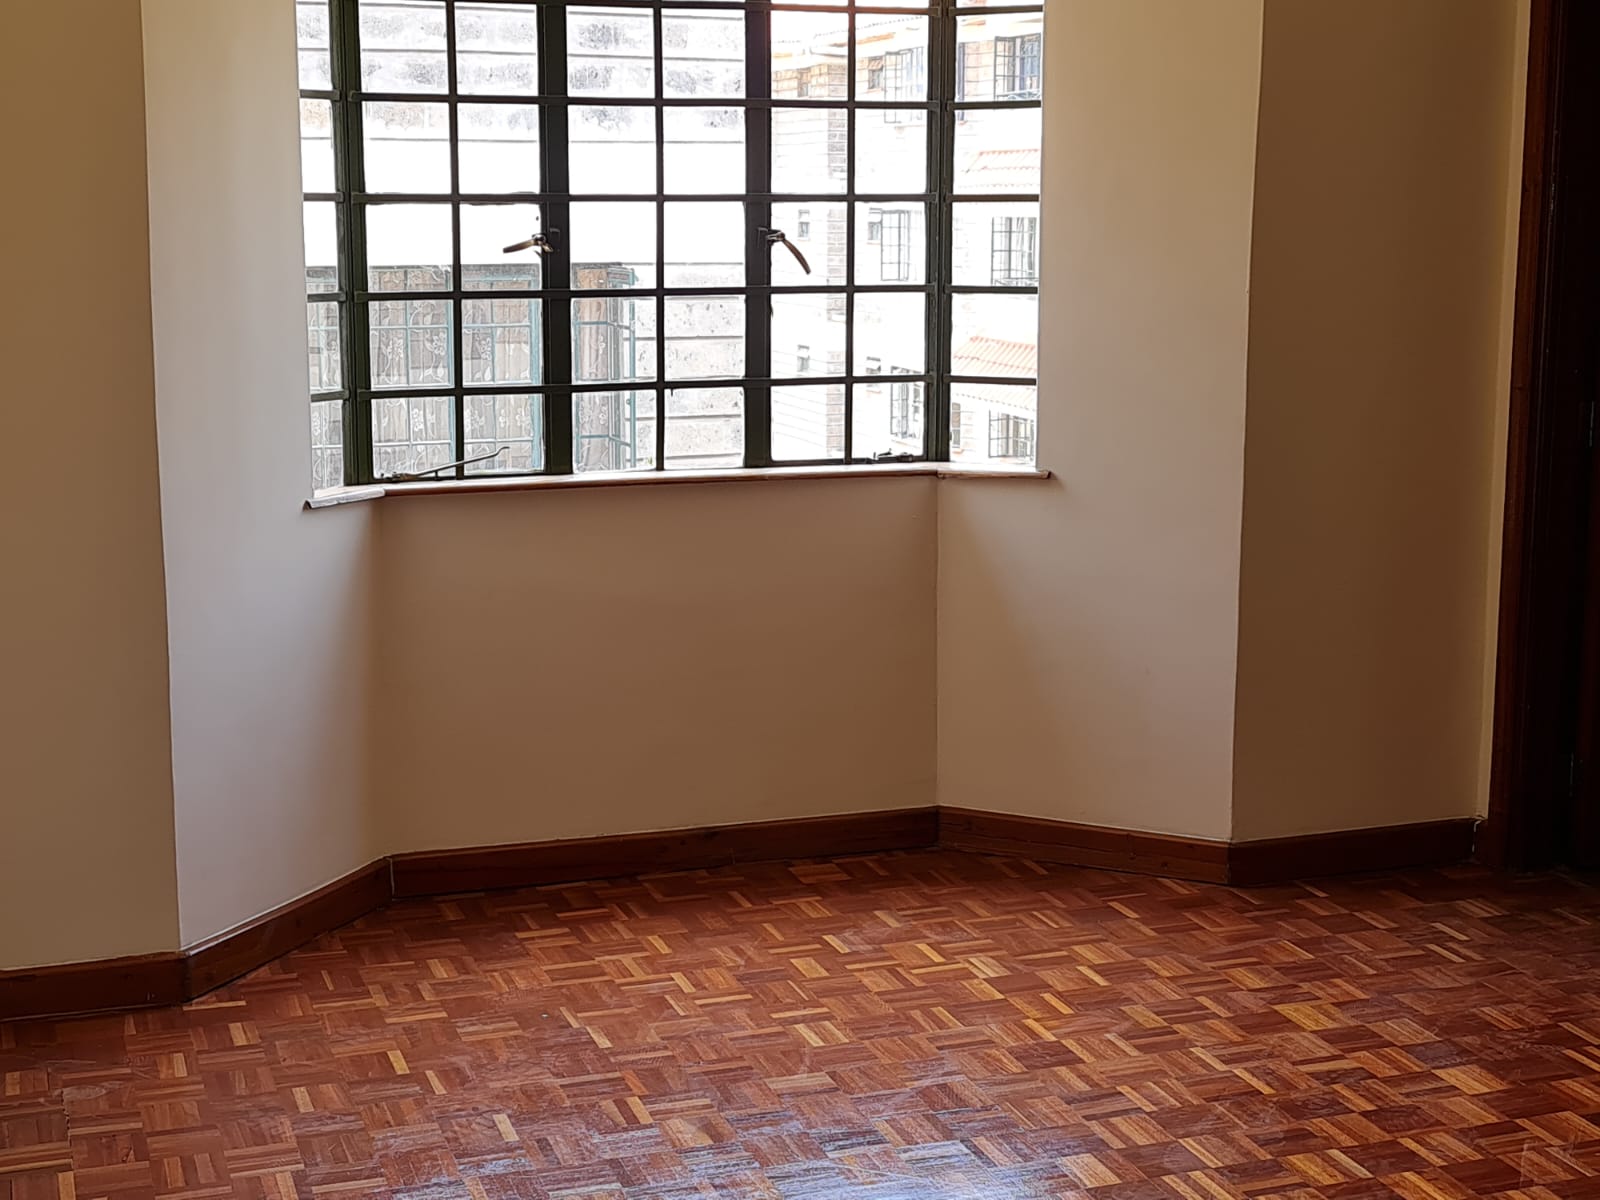 Newly Renovated Spacious 4 Bedroom Apartment for Rent at Ksh95k in Westlands, Raphta Road (11)